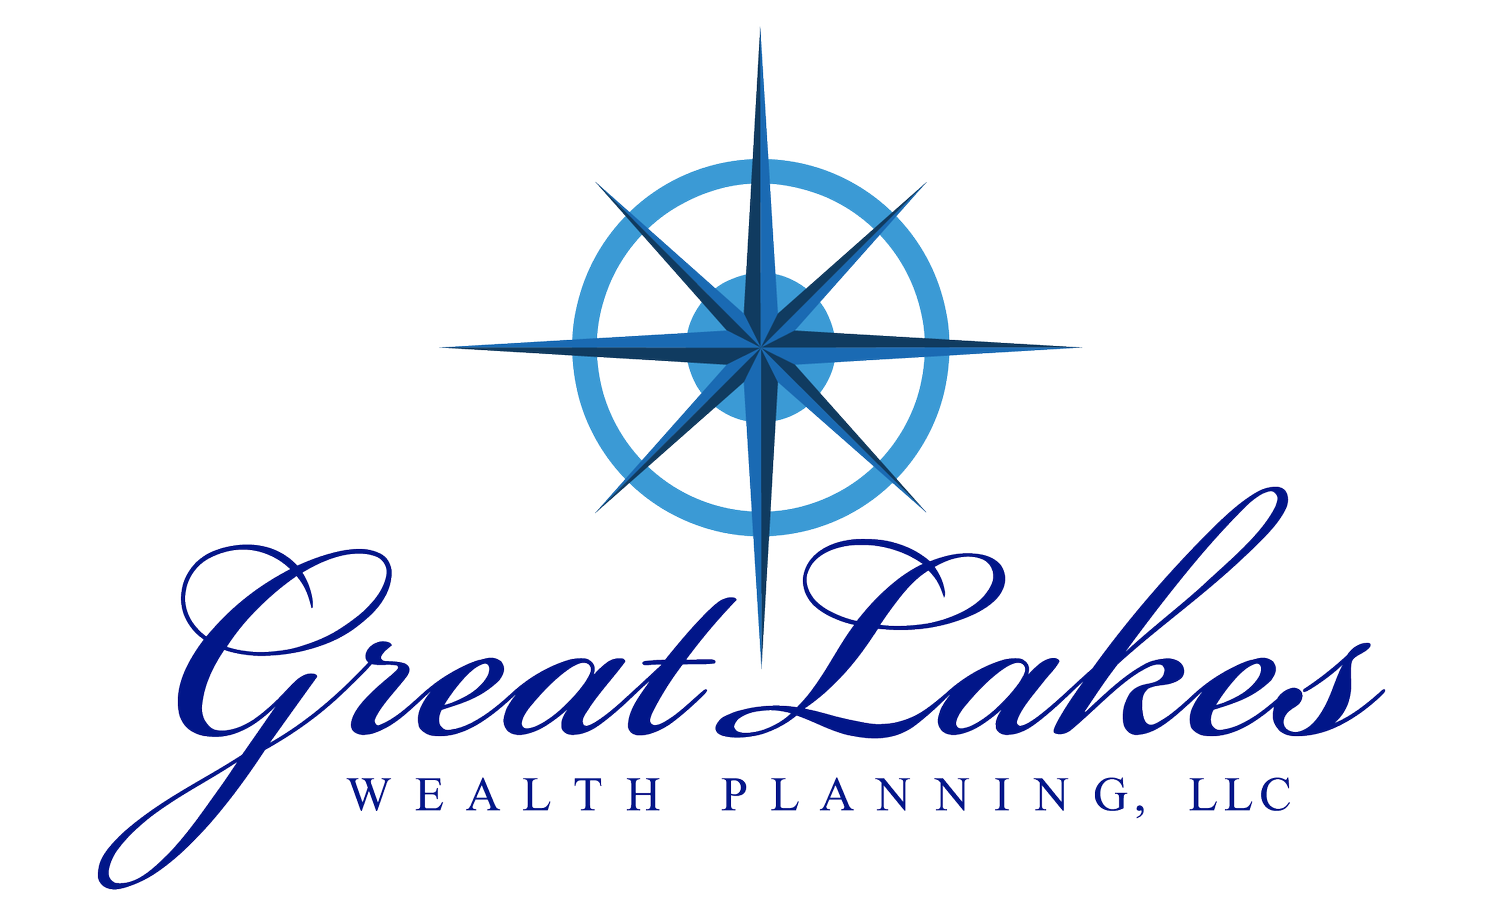 Great Lakes Wealth Planning